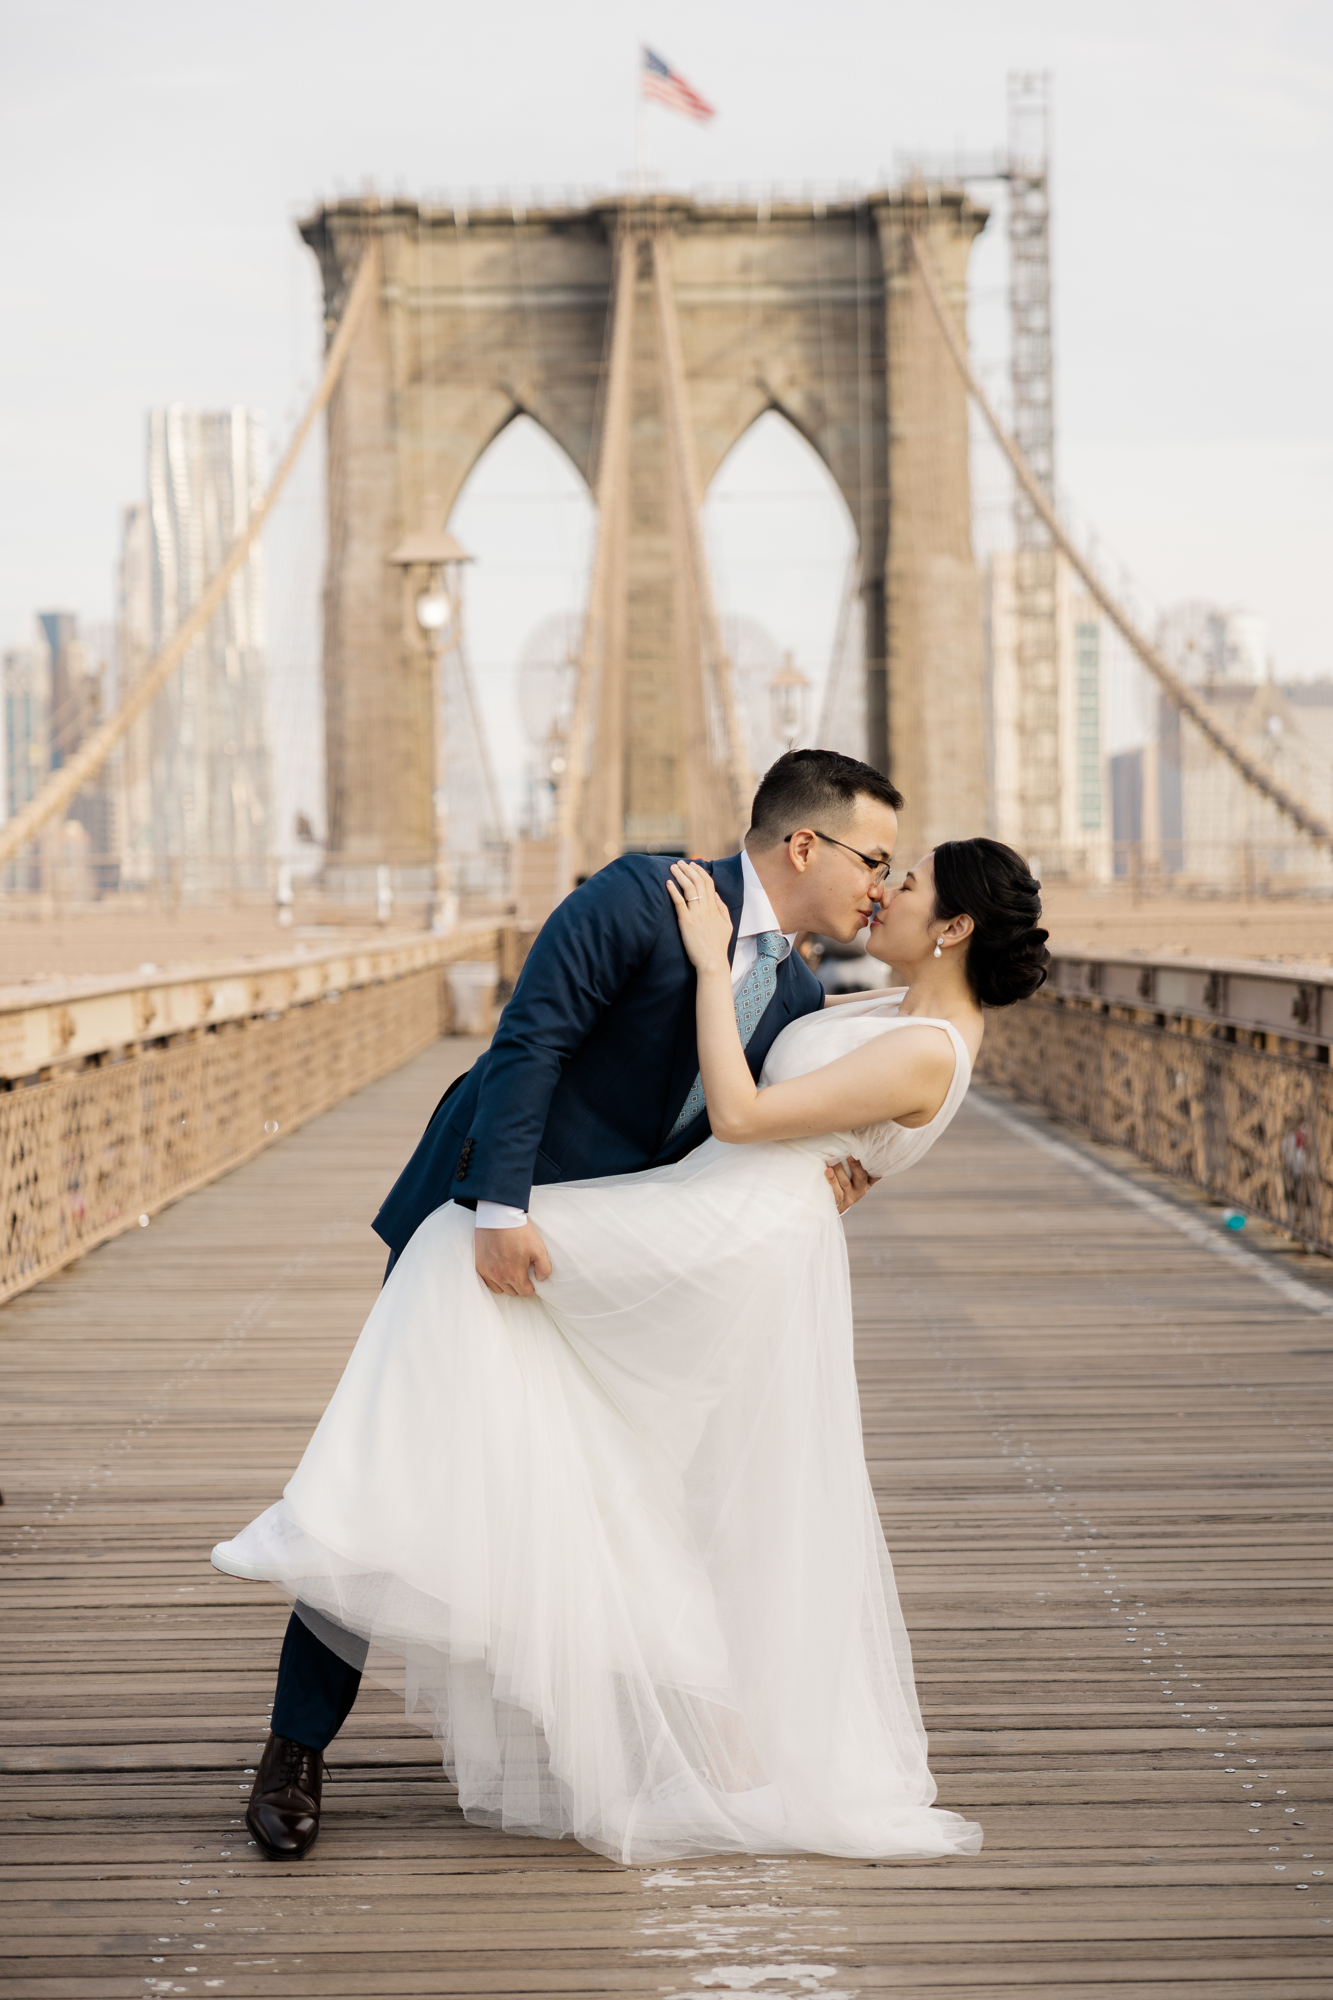 Best Restaurants to Eat at After a Cute DUMBO Elopement